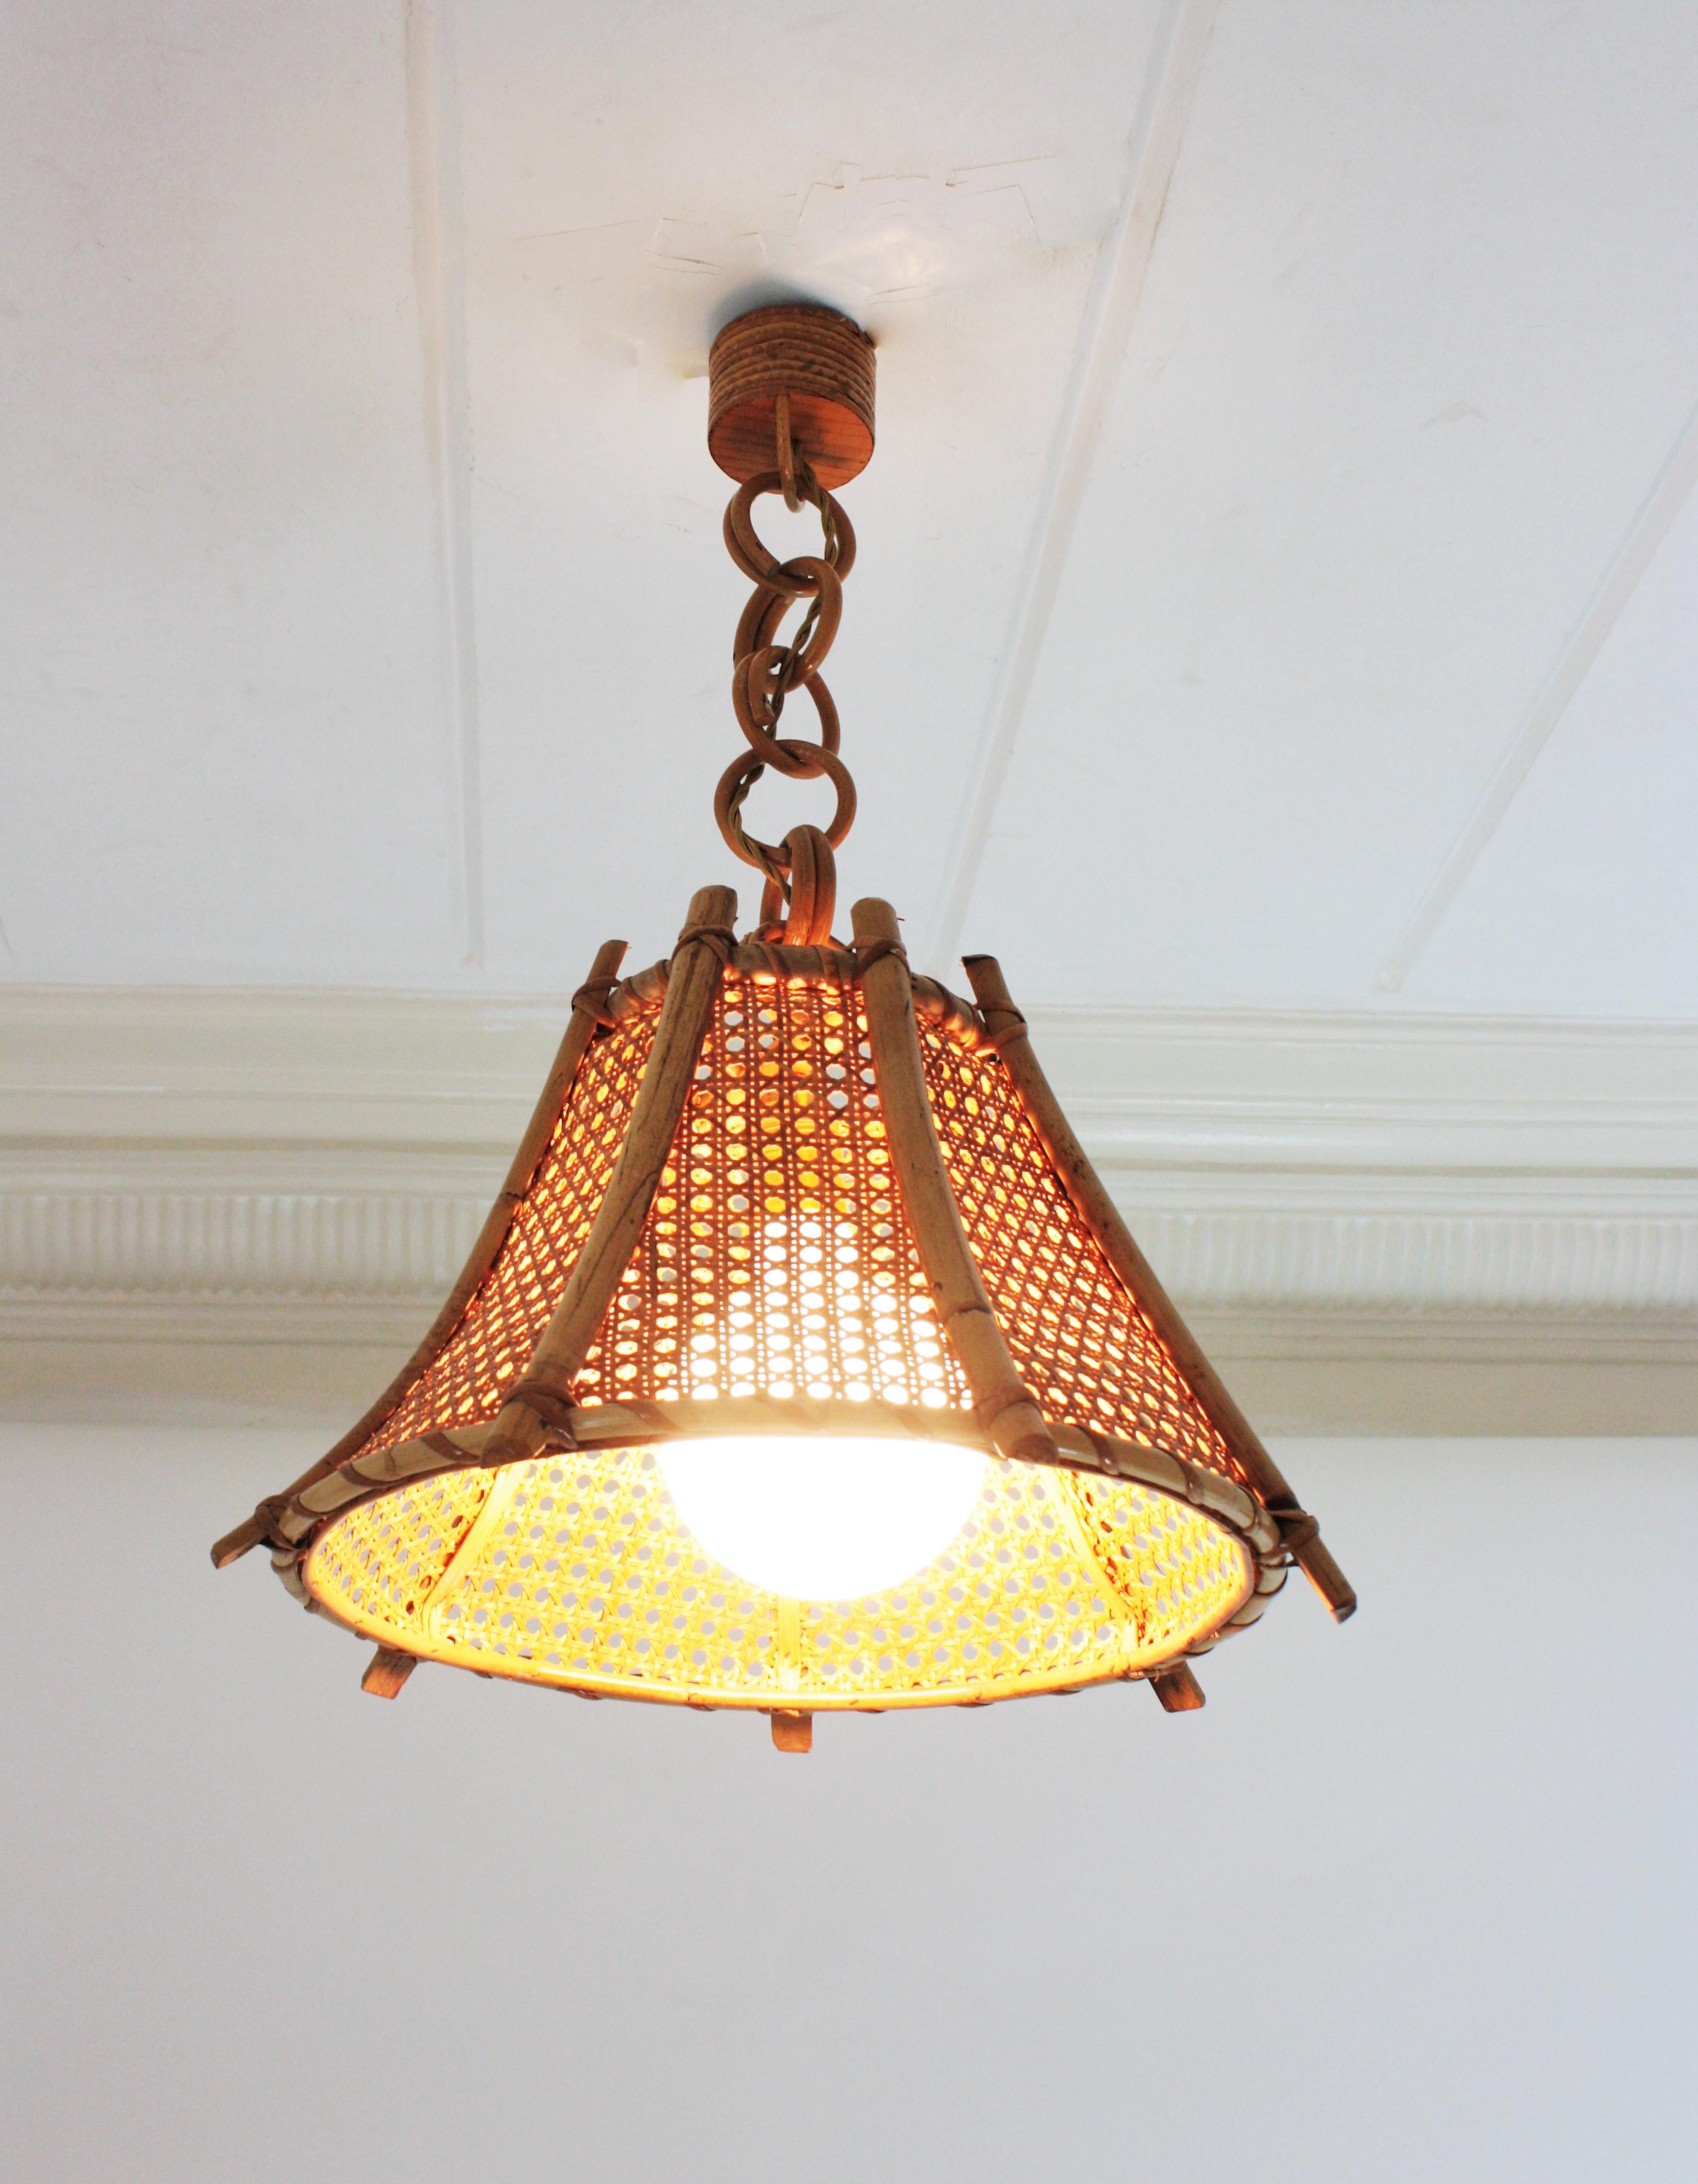 Hand-Crafted Rattan Bamboo and Wicker Pagoda Pendant or Hanging Light, 1960s